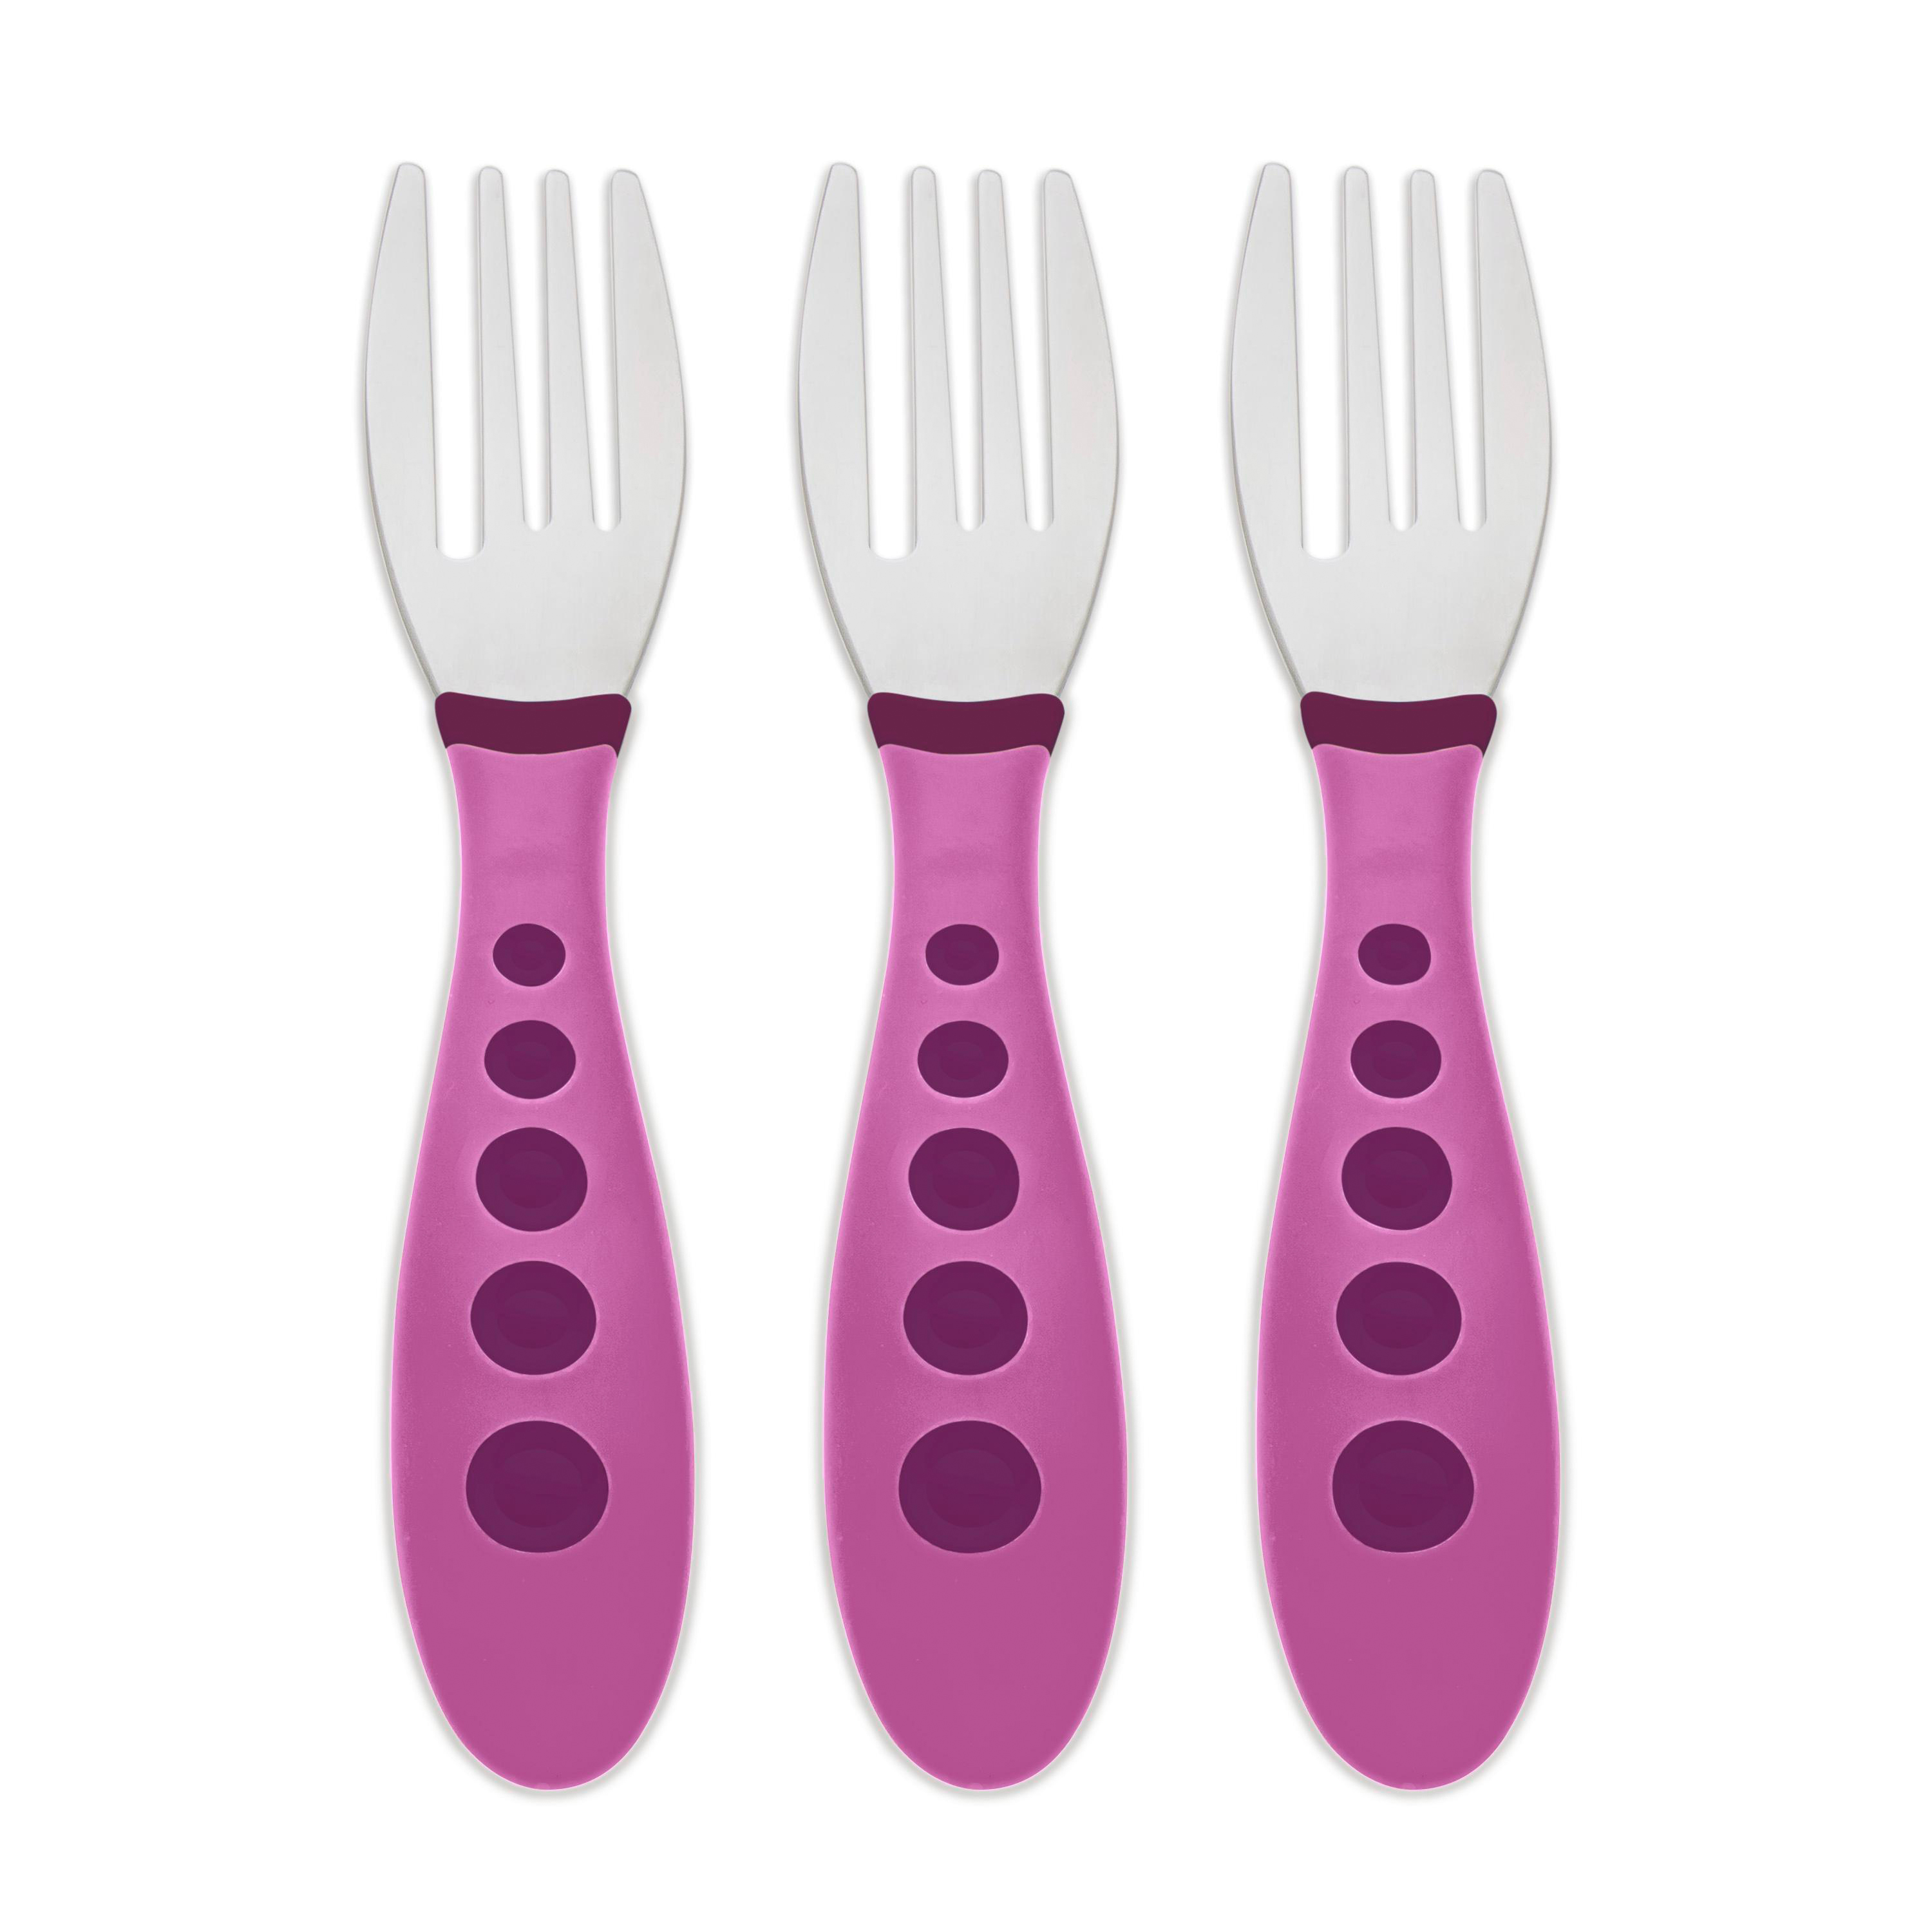 First Essentials by NUK Kiddy Cutlery Forks, 3-Pack, Green, Blue - image 2 of 6